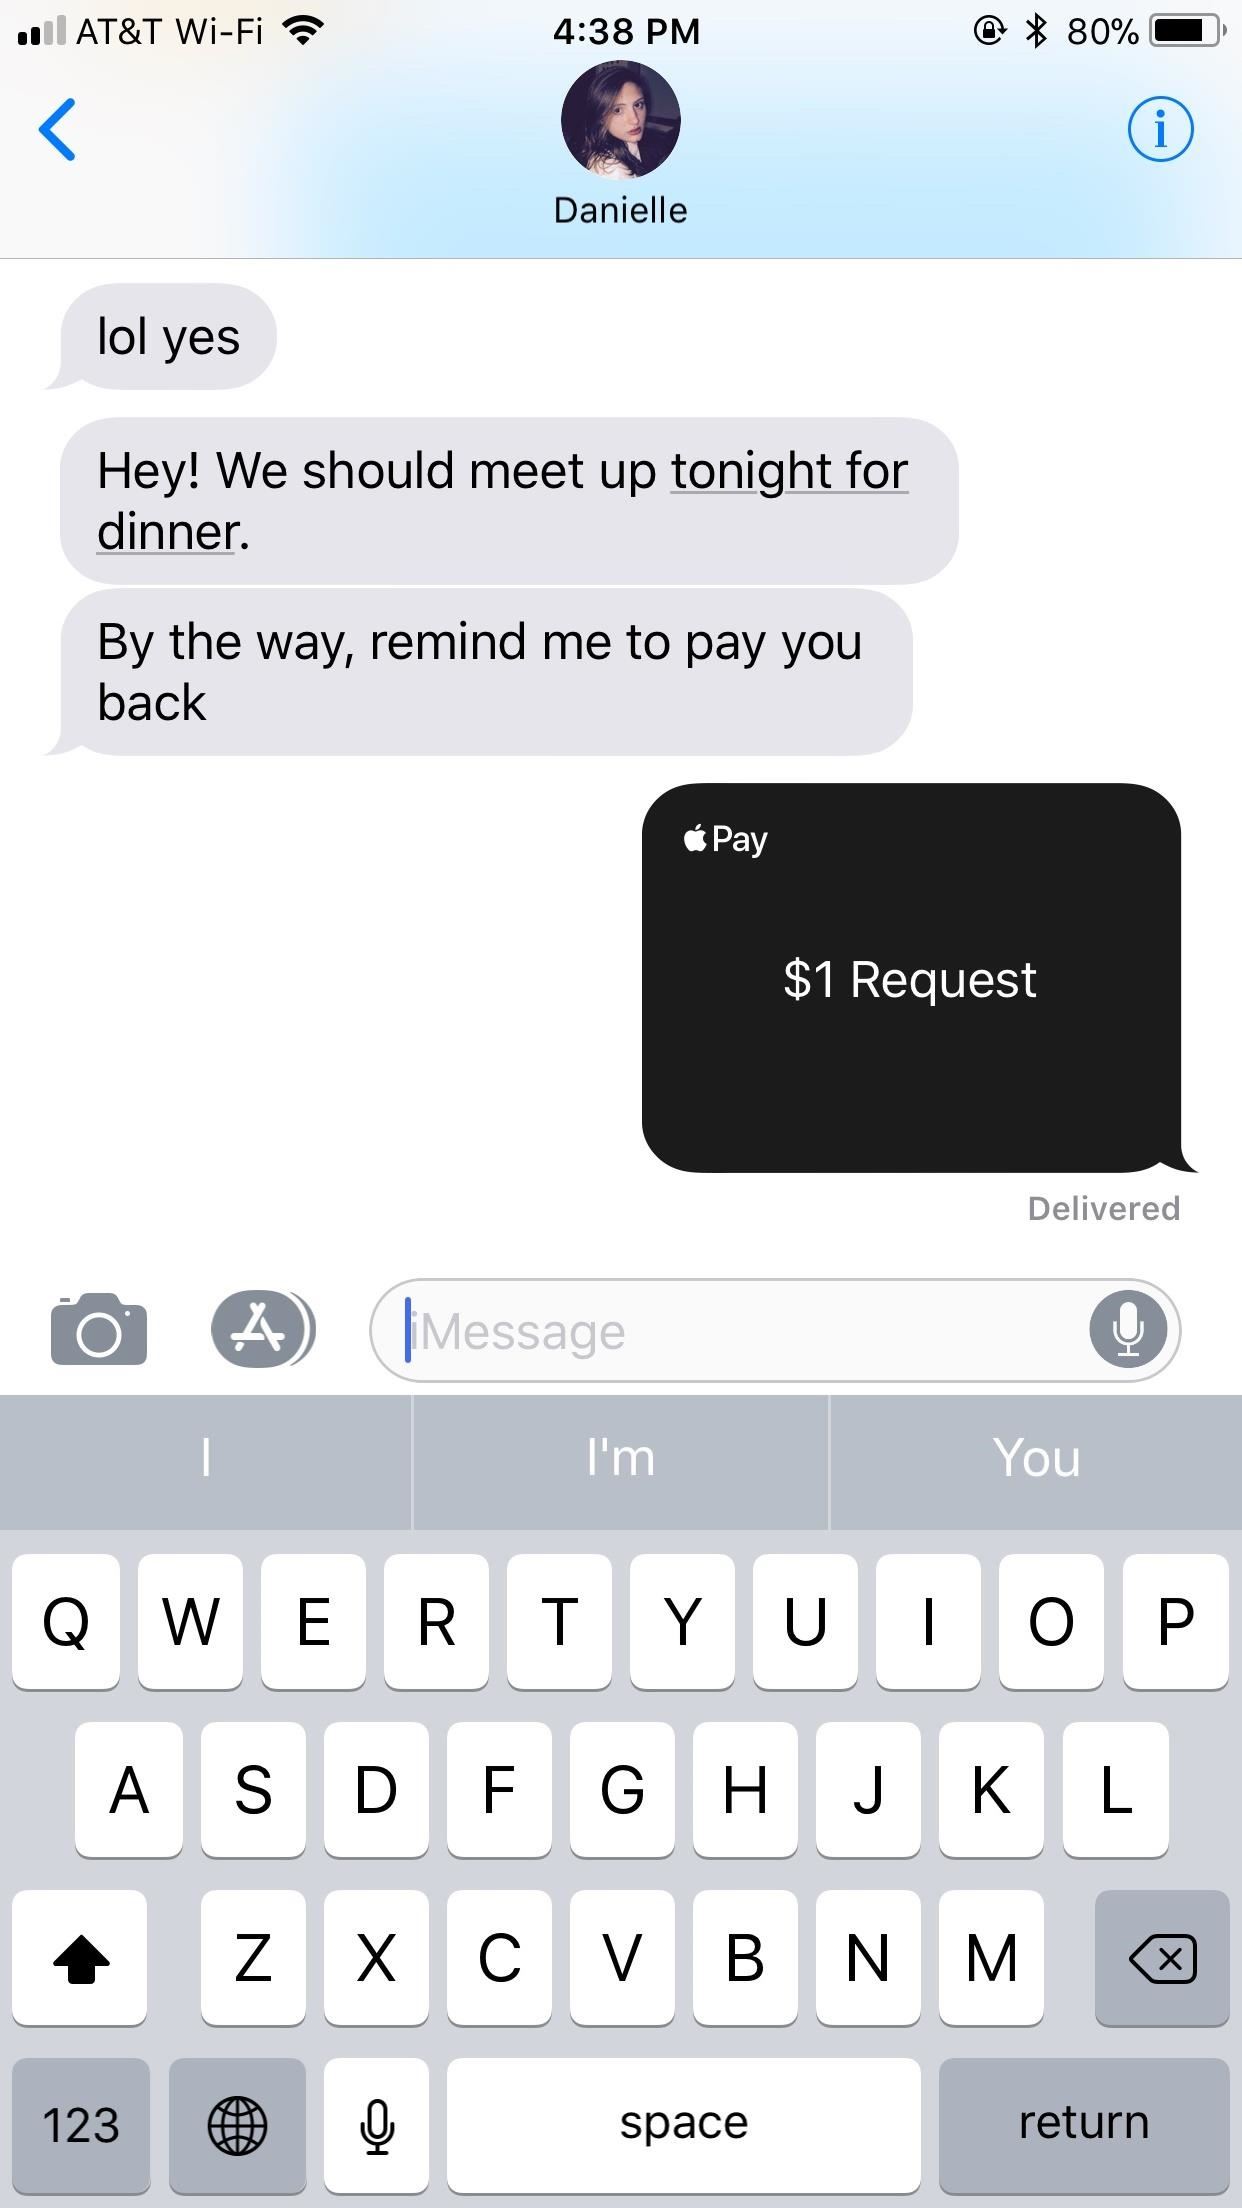 Apple Pay Cash 101: How to Request Money from Friends & Family via iMessage